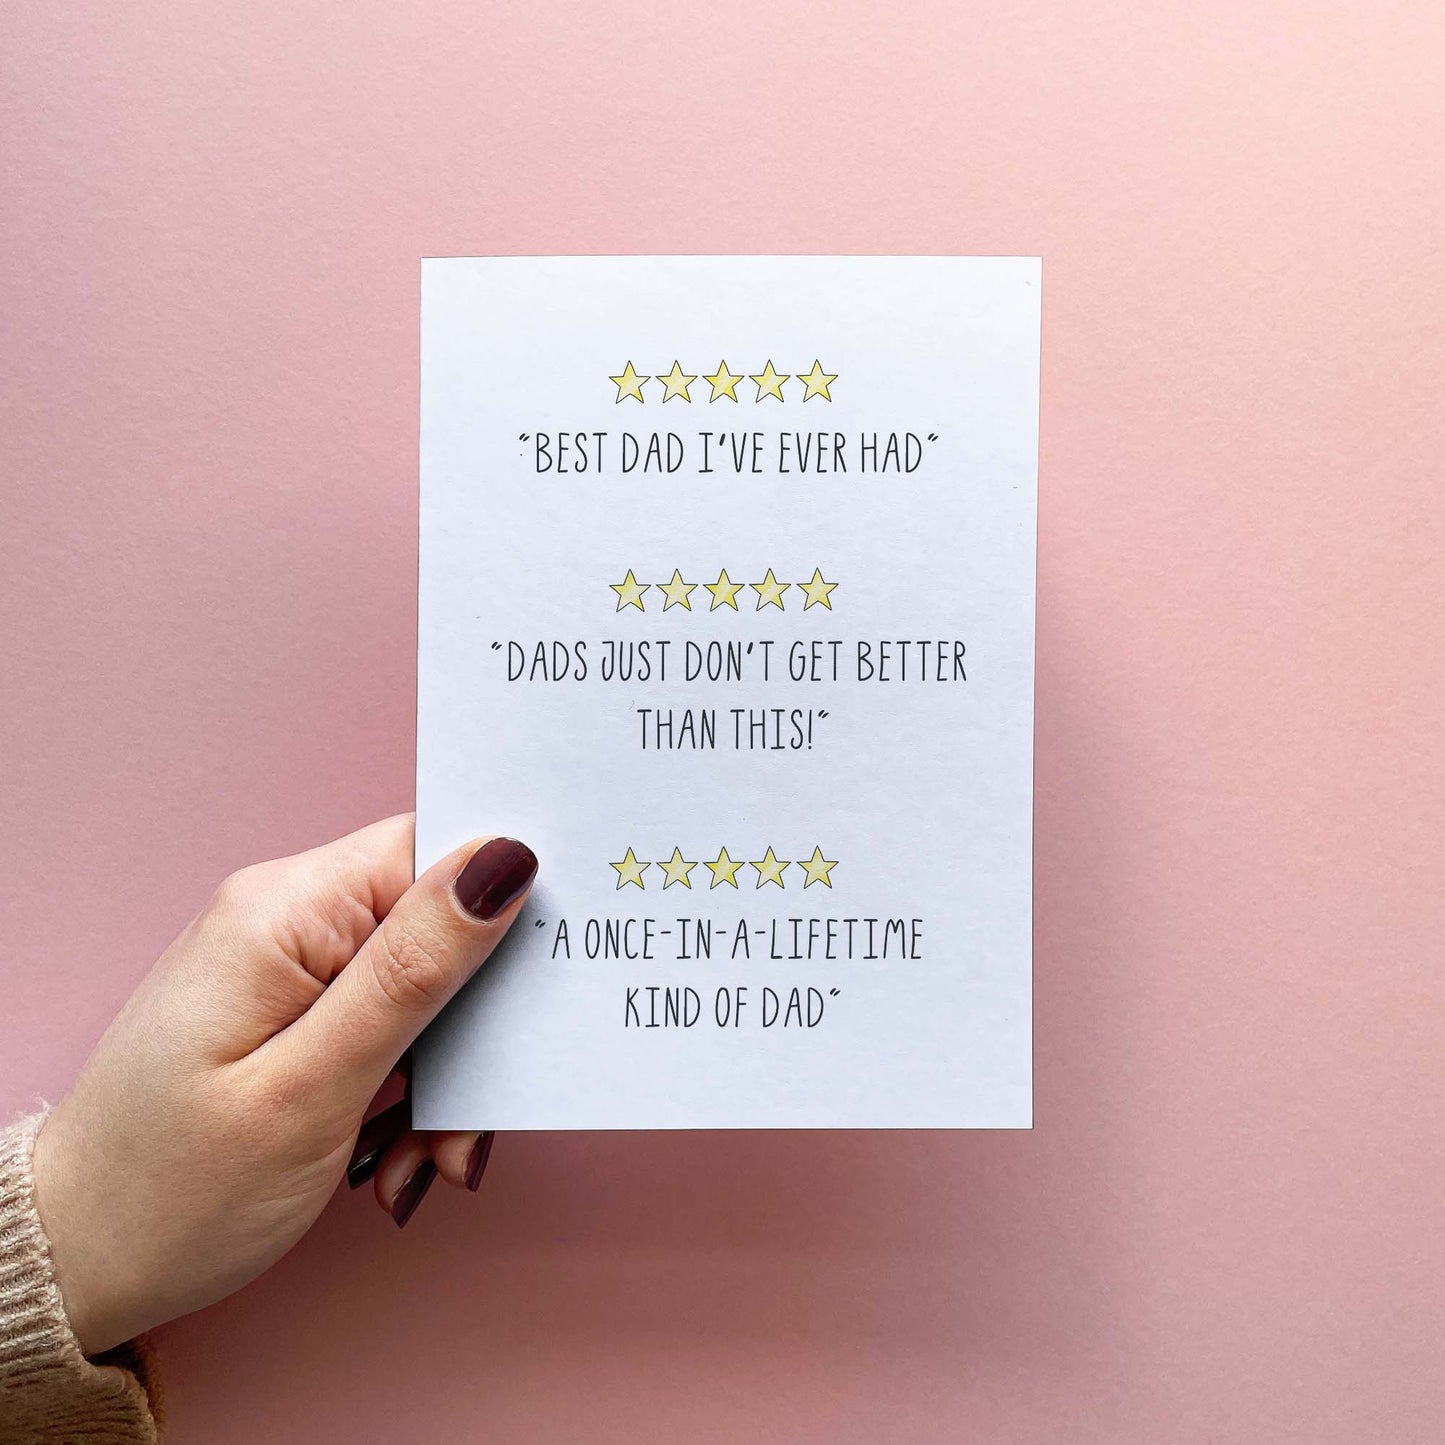 Funny father's day card with 5 star reviews saying 'best dad I've ever had' 'dads just don't get better than this!' 'A once in a lifetime kind of dad' held in hand for size reference. If your father jokes constantly, beat him to the dad joke of the day with this personalised Father's Day card!